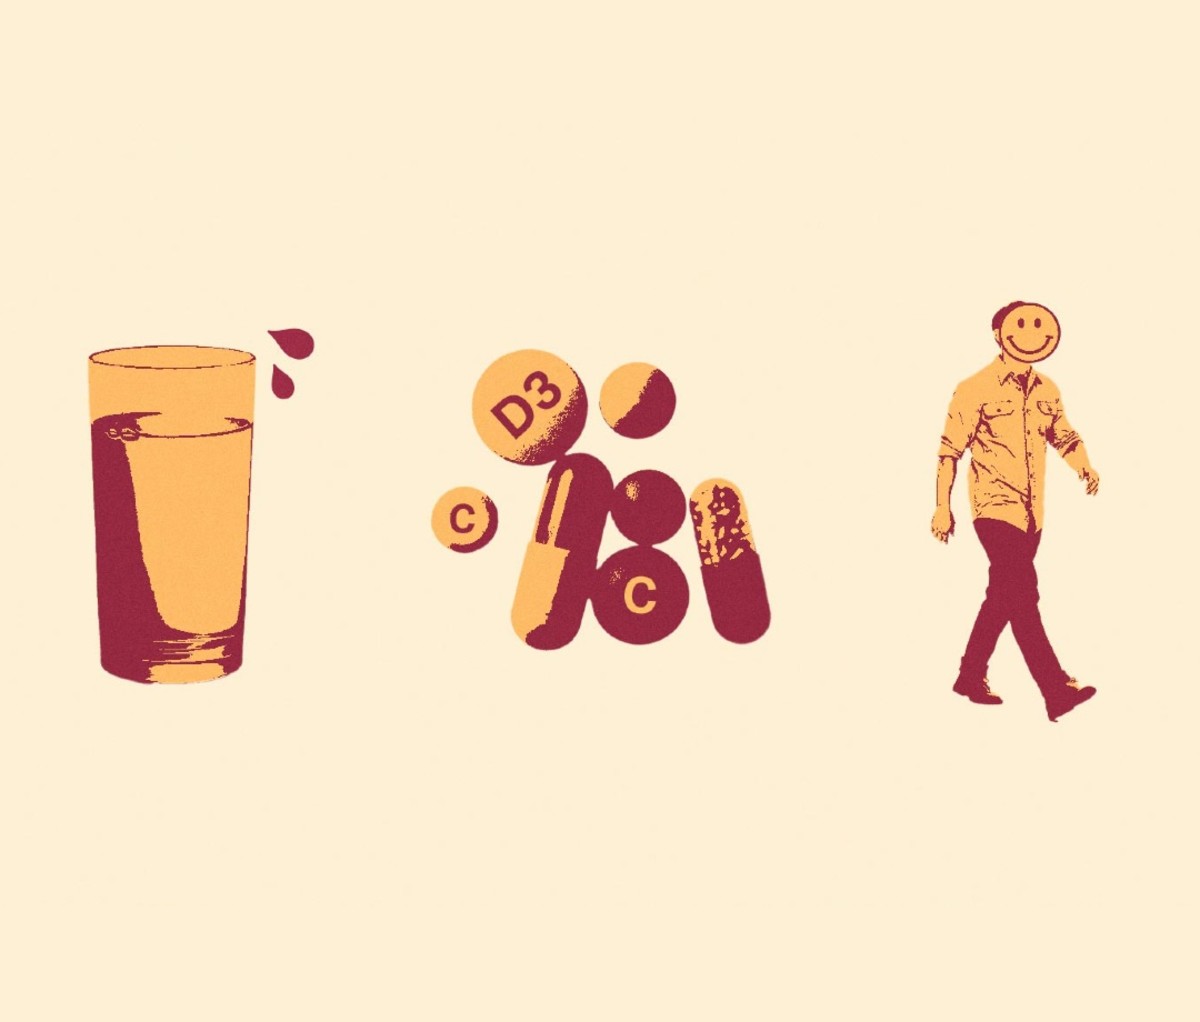 Illustration of a glass of water, multivitamins, and man getting exercise